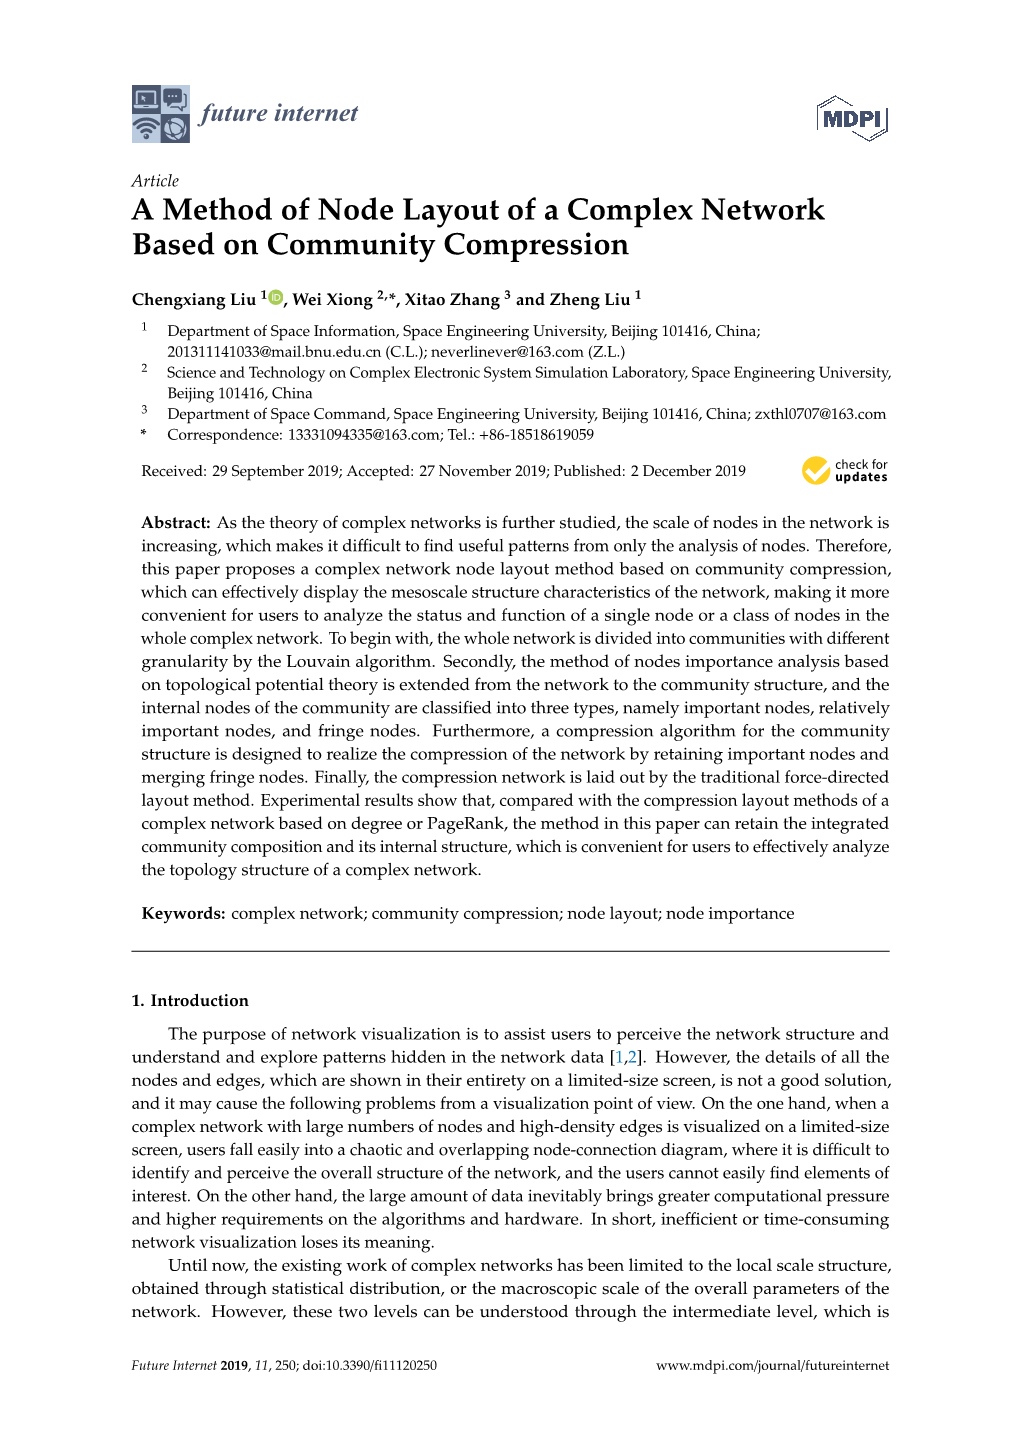 A Method of Node Layout of a Complex Network Based on Community Compression